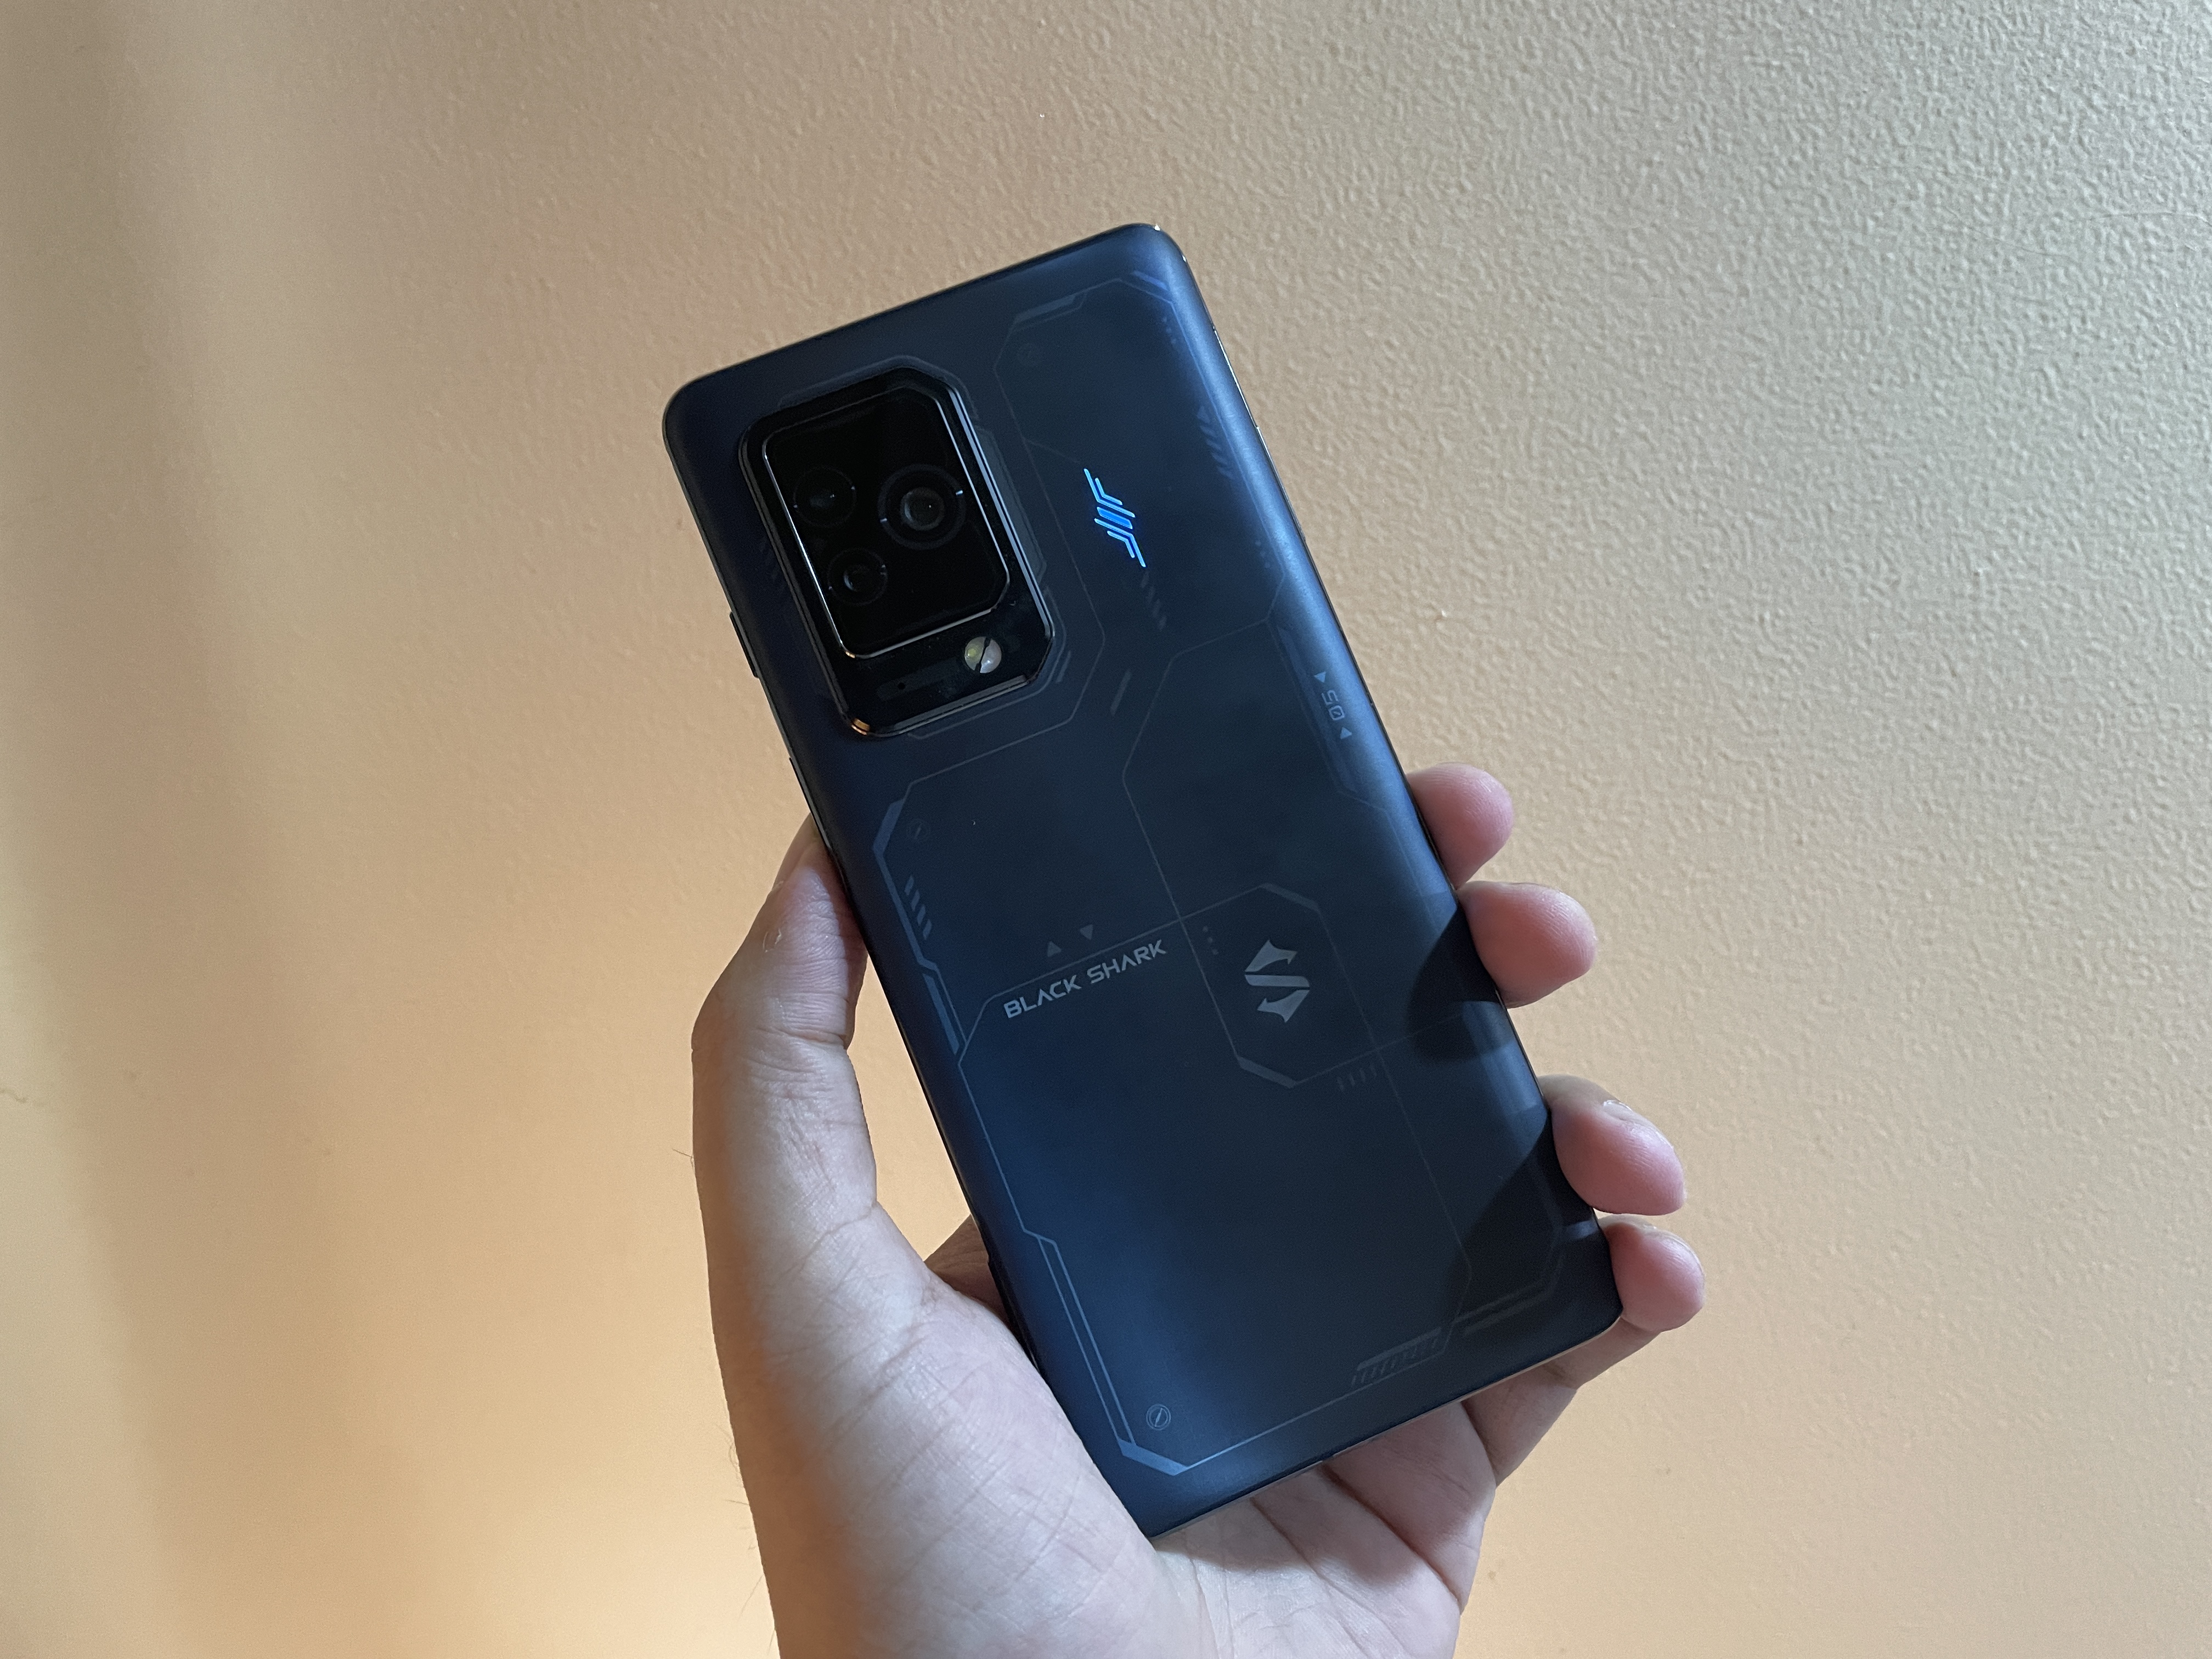 The Black Shark 5 Pro puts the grace in gaming phones